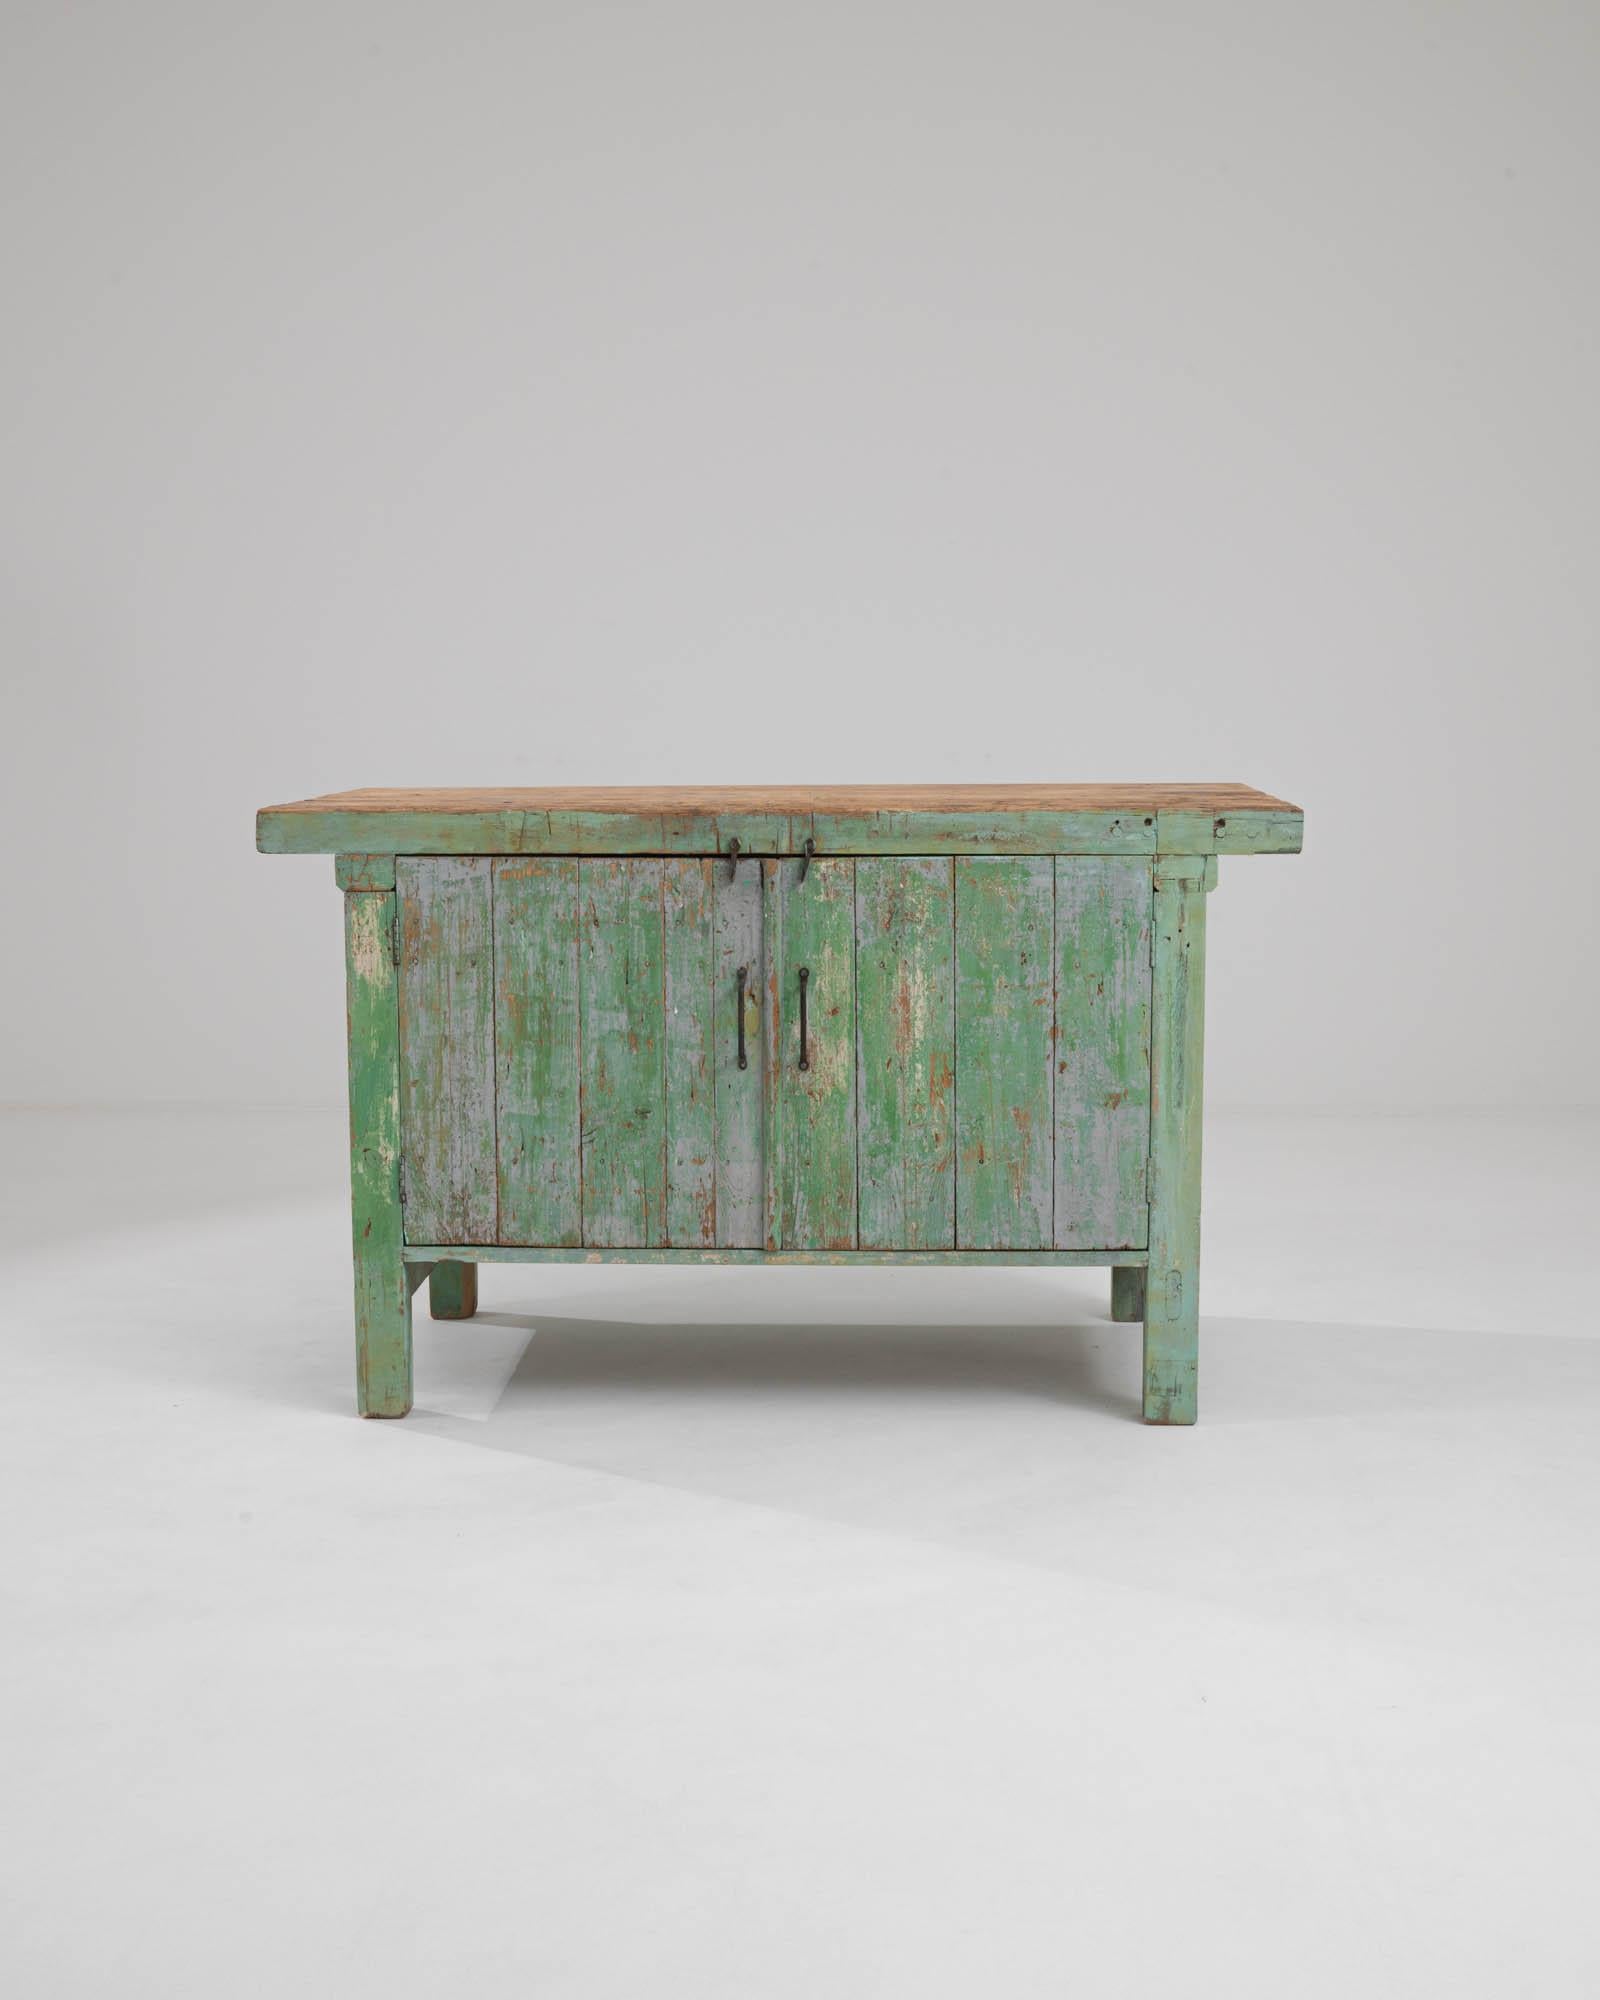 A wooden work table made in 20th century Belgium. The mint green coat of paint has faded to expose underlying browns and beiges along the exterior of this mysterious cabinet. Inside, two drawers perch upon its upper left side, speckled with frosty